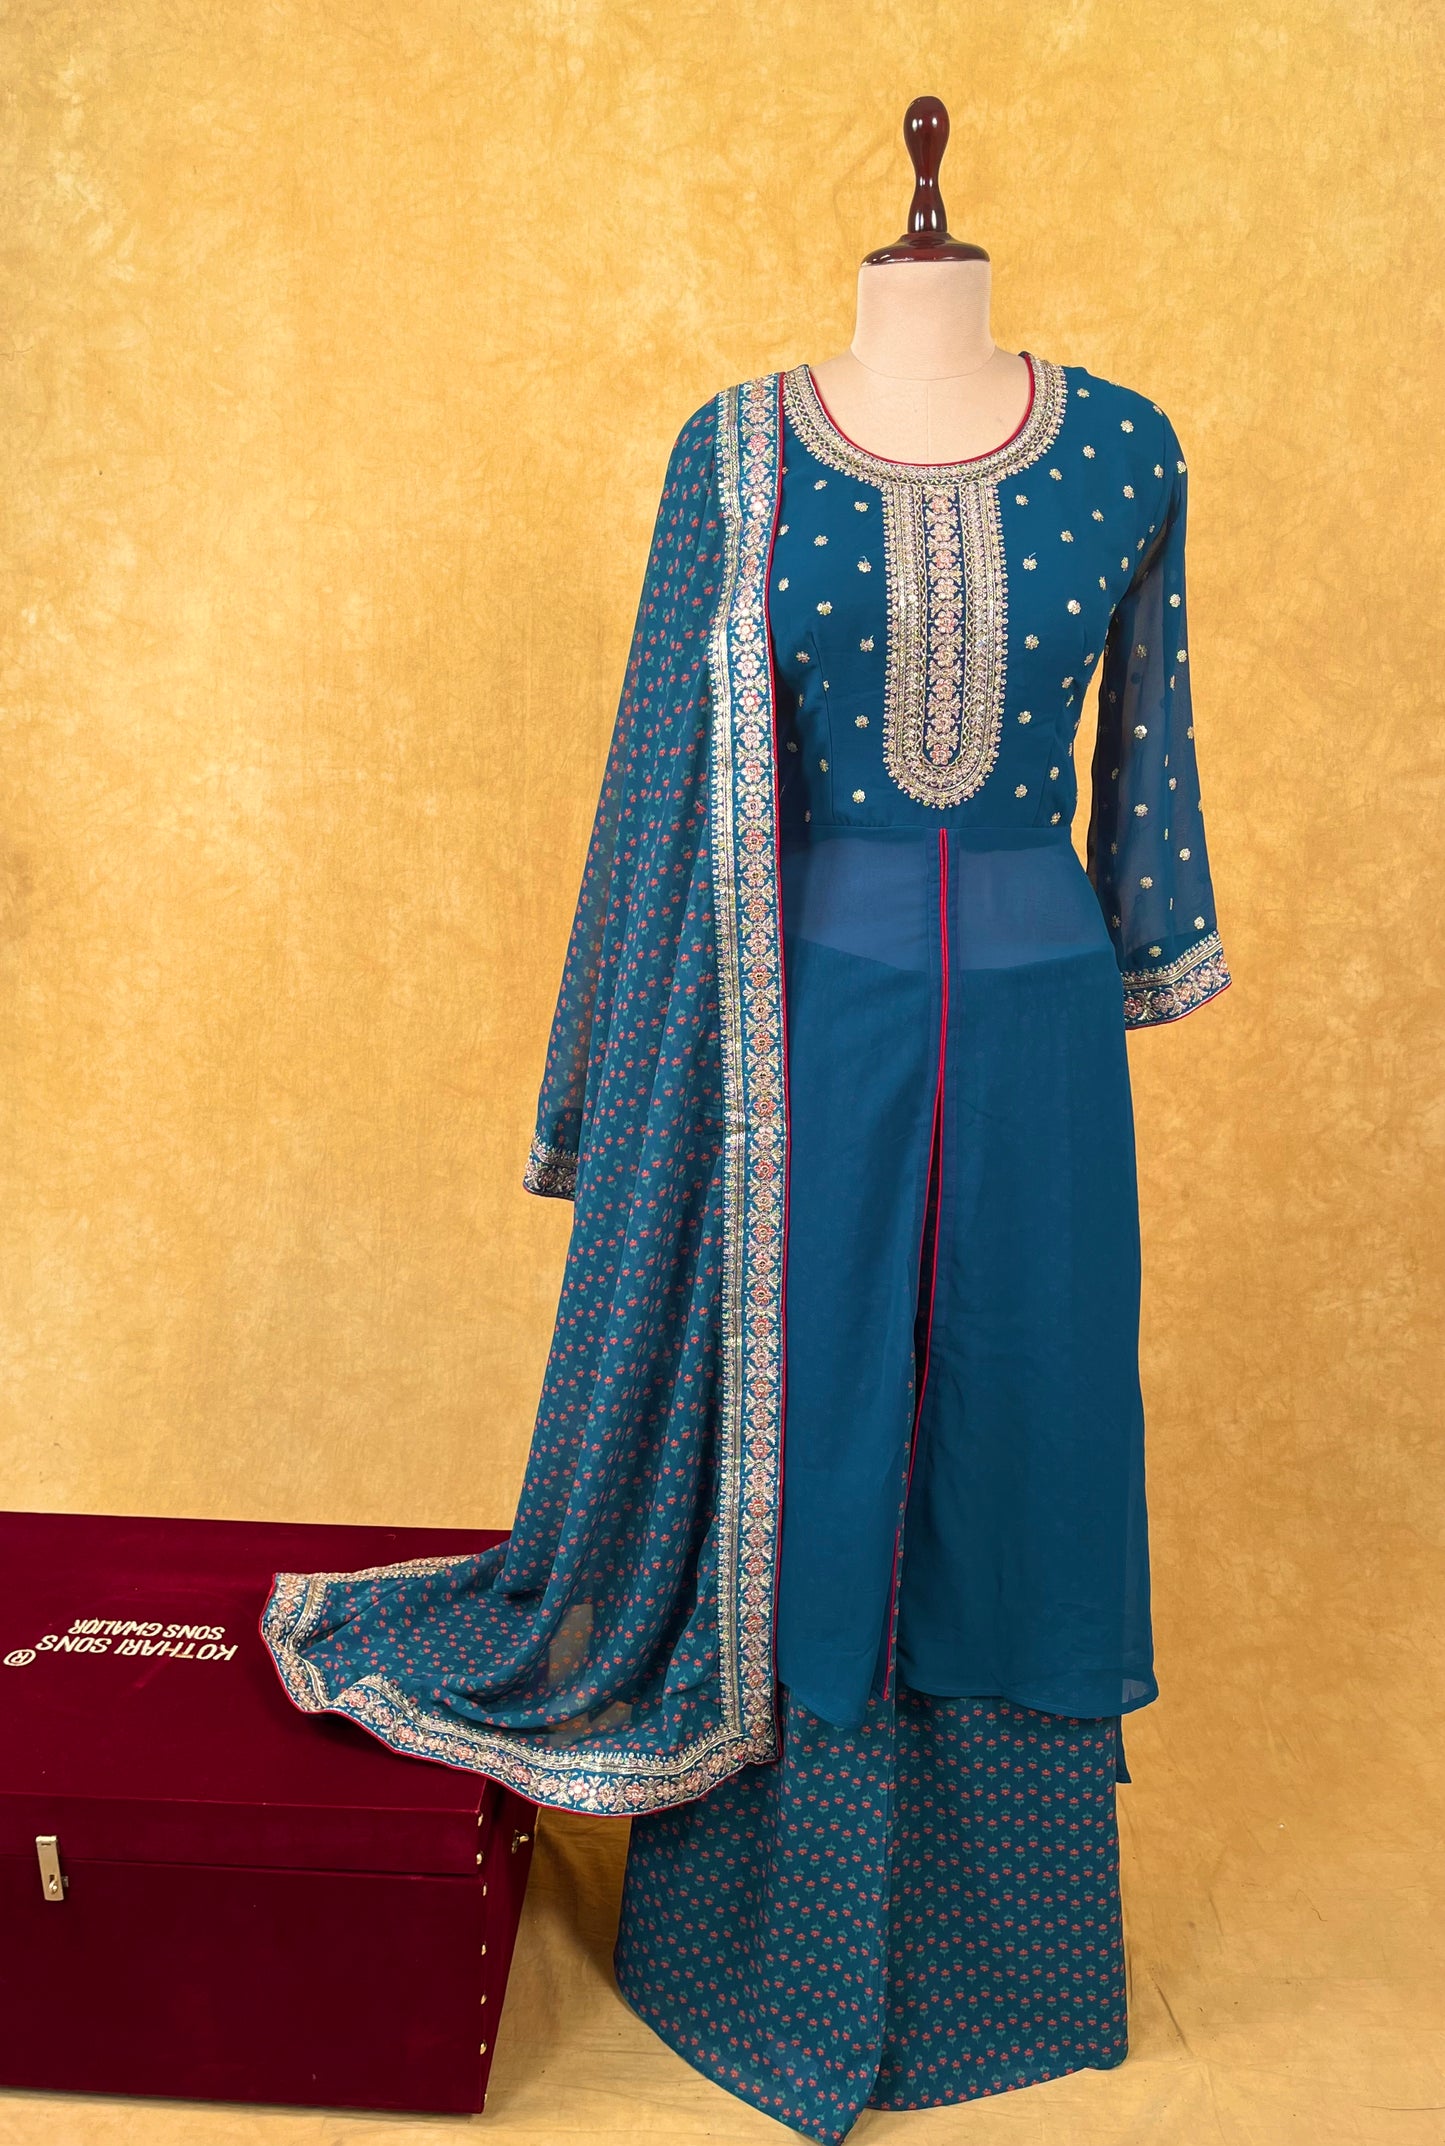 TEAL BLUE COLOUR GEORGETTE FRONT SLIT PALAZZO SUIT EMBELLISHED WITH ZARI WEAVES